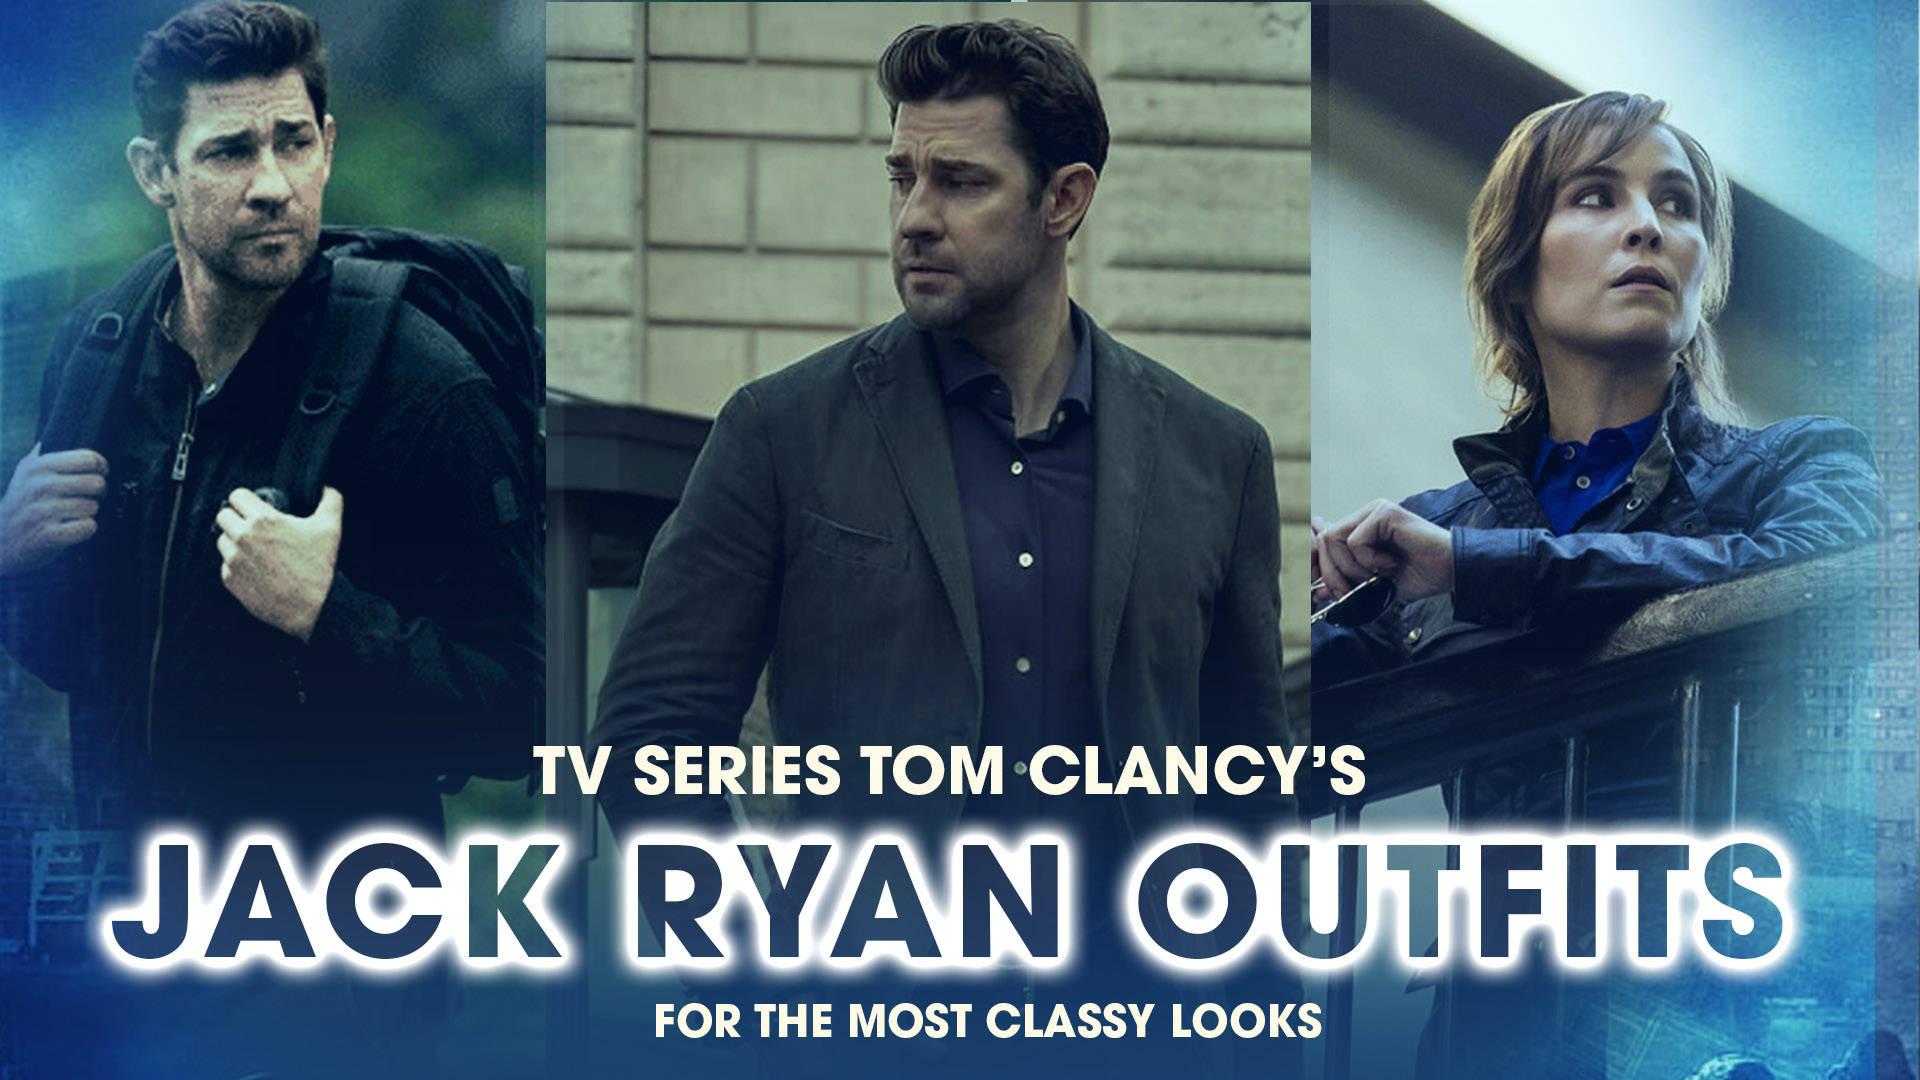 https://www.northamericanjackets.com/wp-content/uploads/Tv-Series-Tom-Clancys-Jack-Ryan-Outfits-for-the-most-classy-looks.jpg